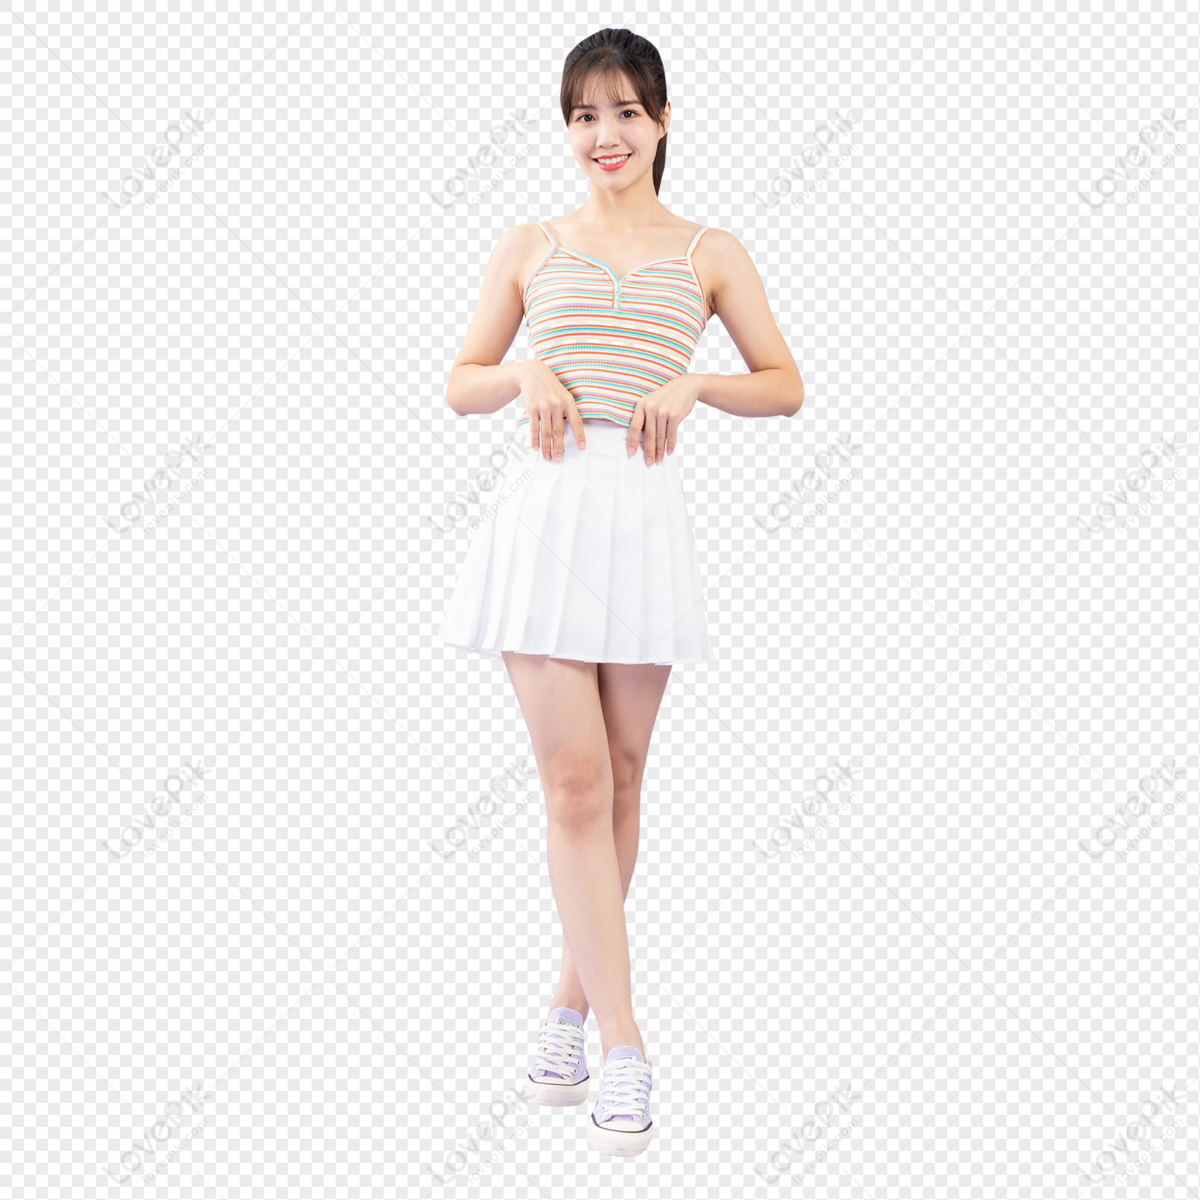 Cute Girl Image PNG Transparent And Clipart Image For Free Download ...